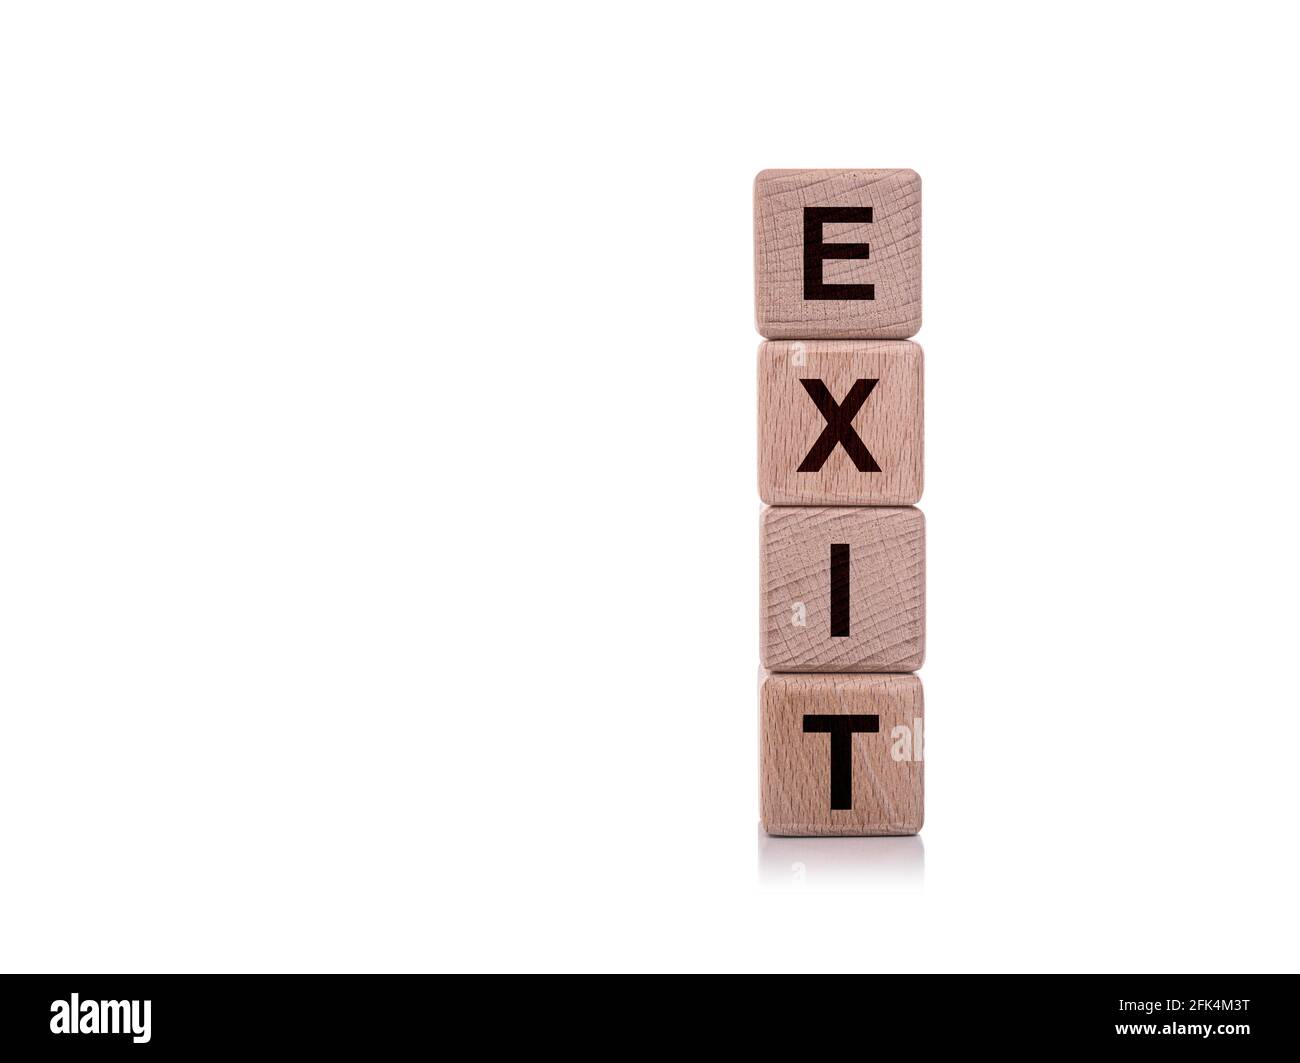 Exit. Wooden cubes with the word exit on a white background. Stock Photo